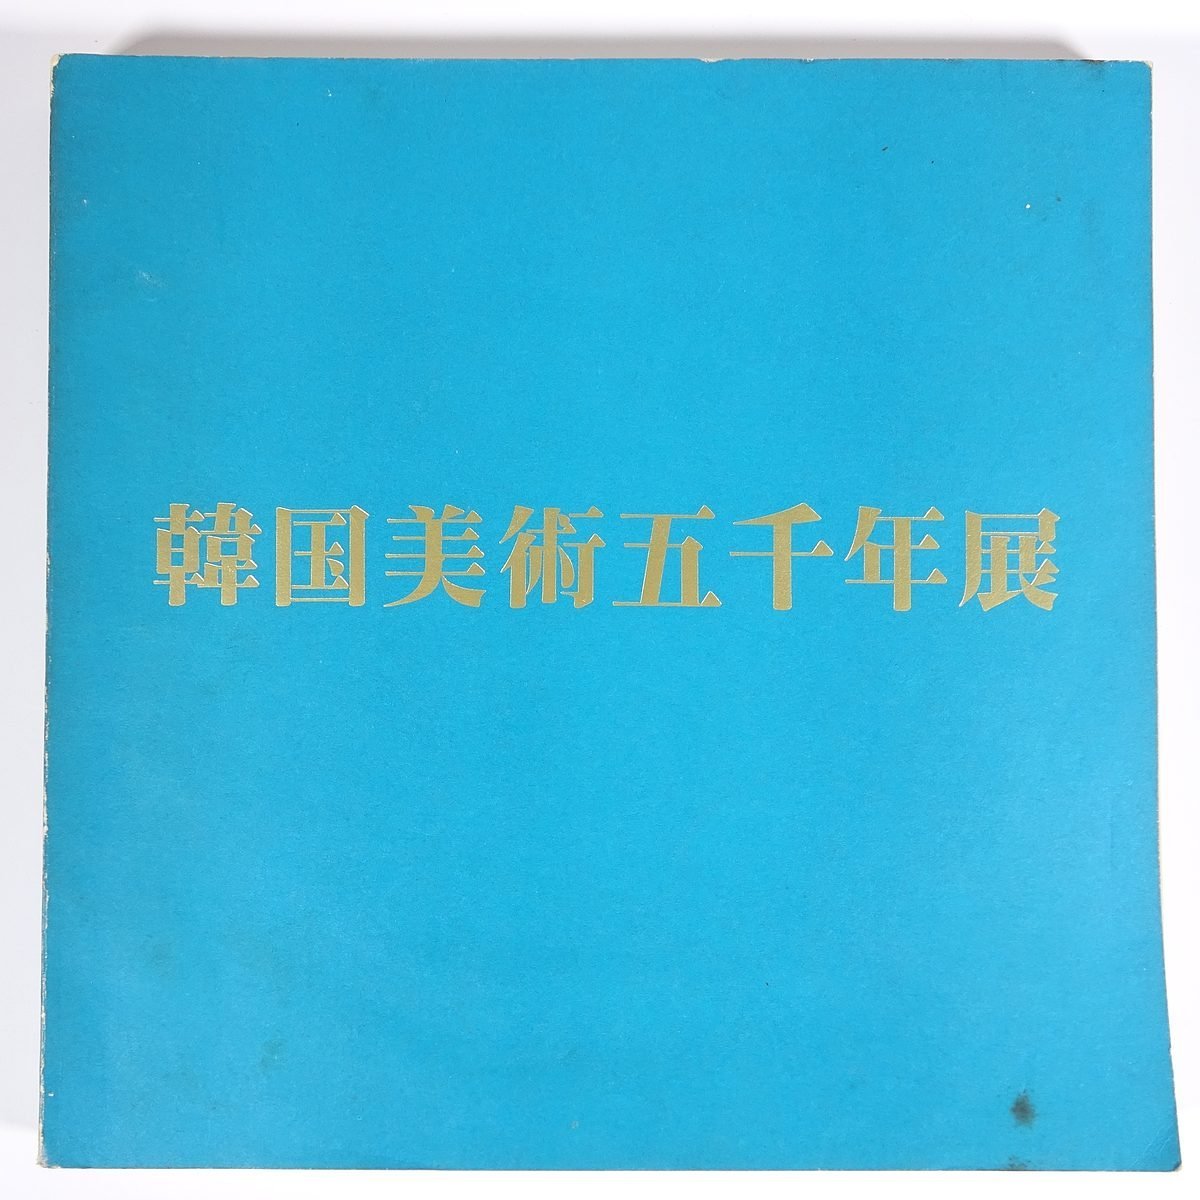  Korea fine art . thousand year exhibition Korea country . centre museum 1976 large book@ exhibition viewing . map version llustrated book list art fine art picture industrial arts ceramic art another 